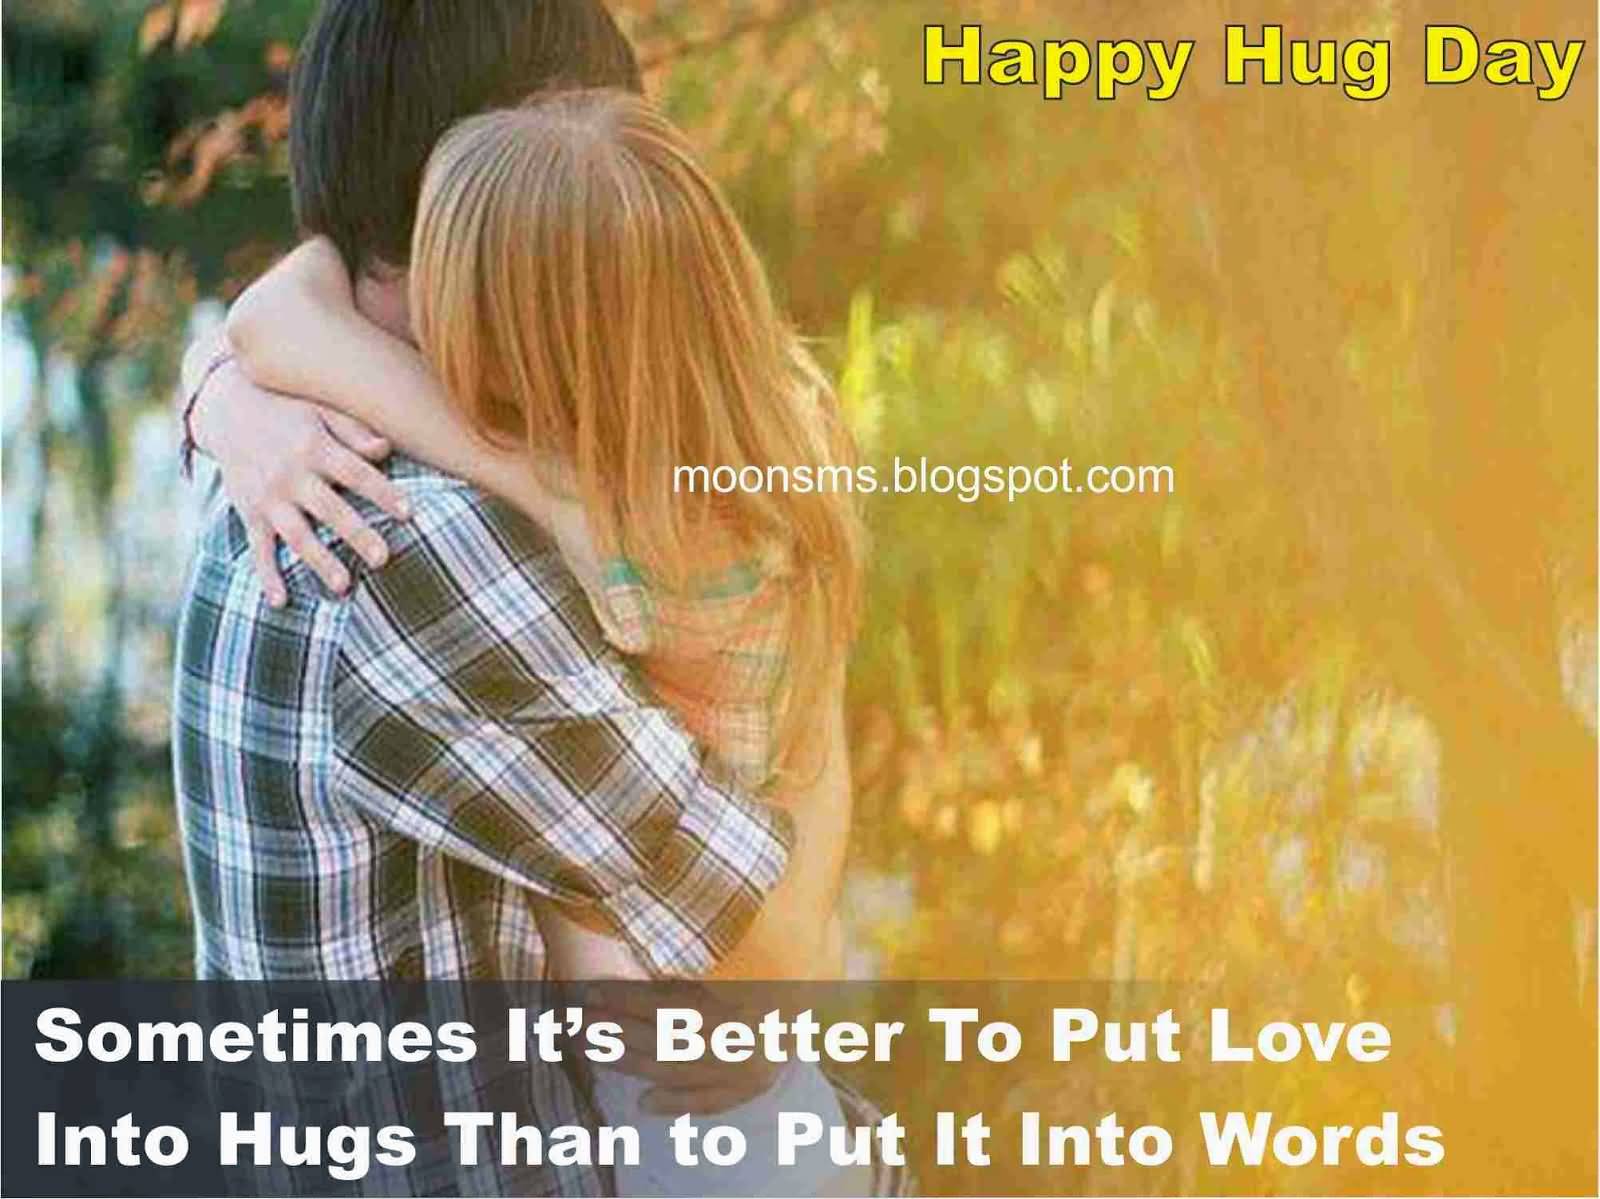 Happy Hug Day Sometimes It's Better To Put Love Into Hugs Than To Put In Into Words